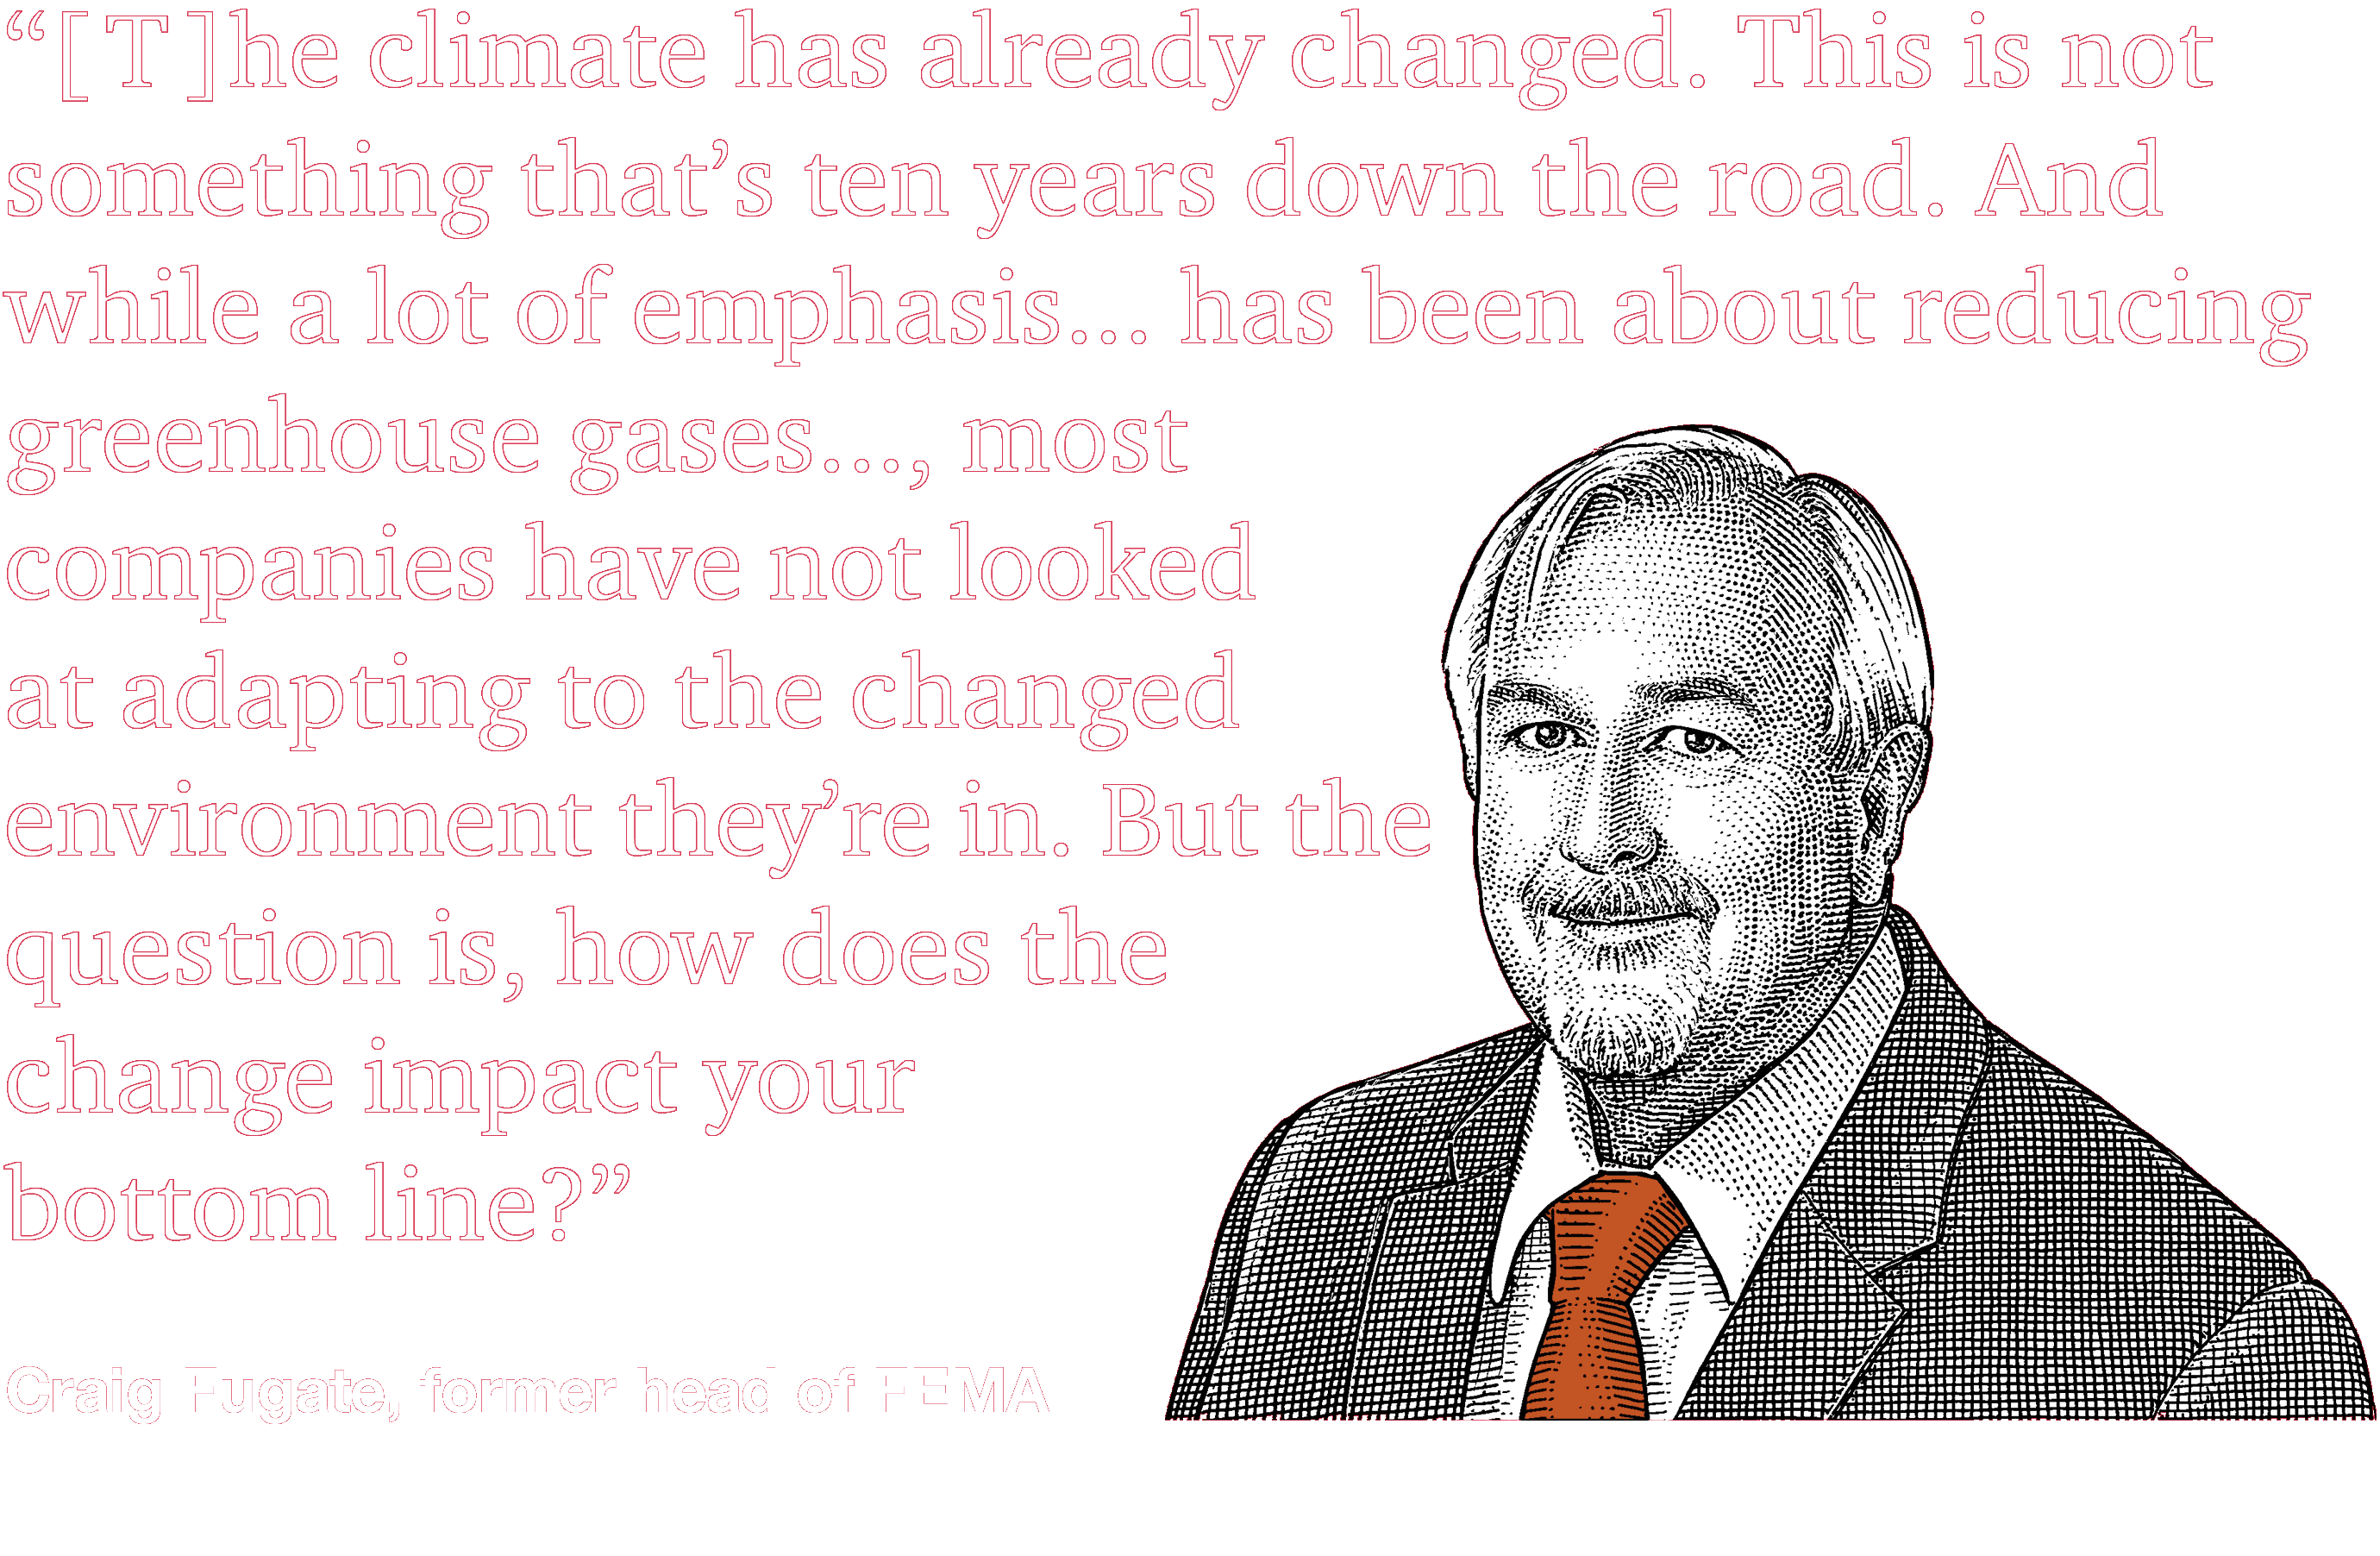 “[T]he climate has already changed. This is not something that’s ten years down the road. And while a lot of emphasis...has been about reducing greenhouse gases..., most companies have not looked at adapting to the changed environment they’re in. But the question is, how does the change impact your bottom line?” --Craig Fugate, former head of FEMA